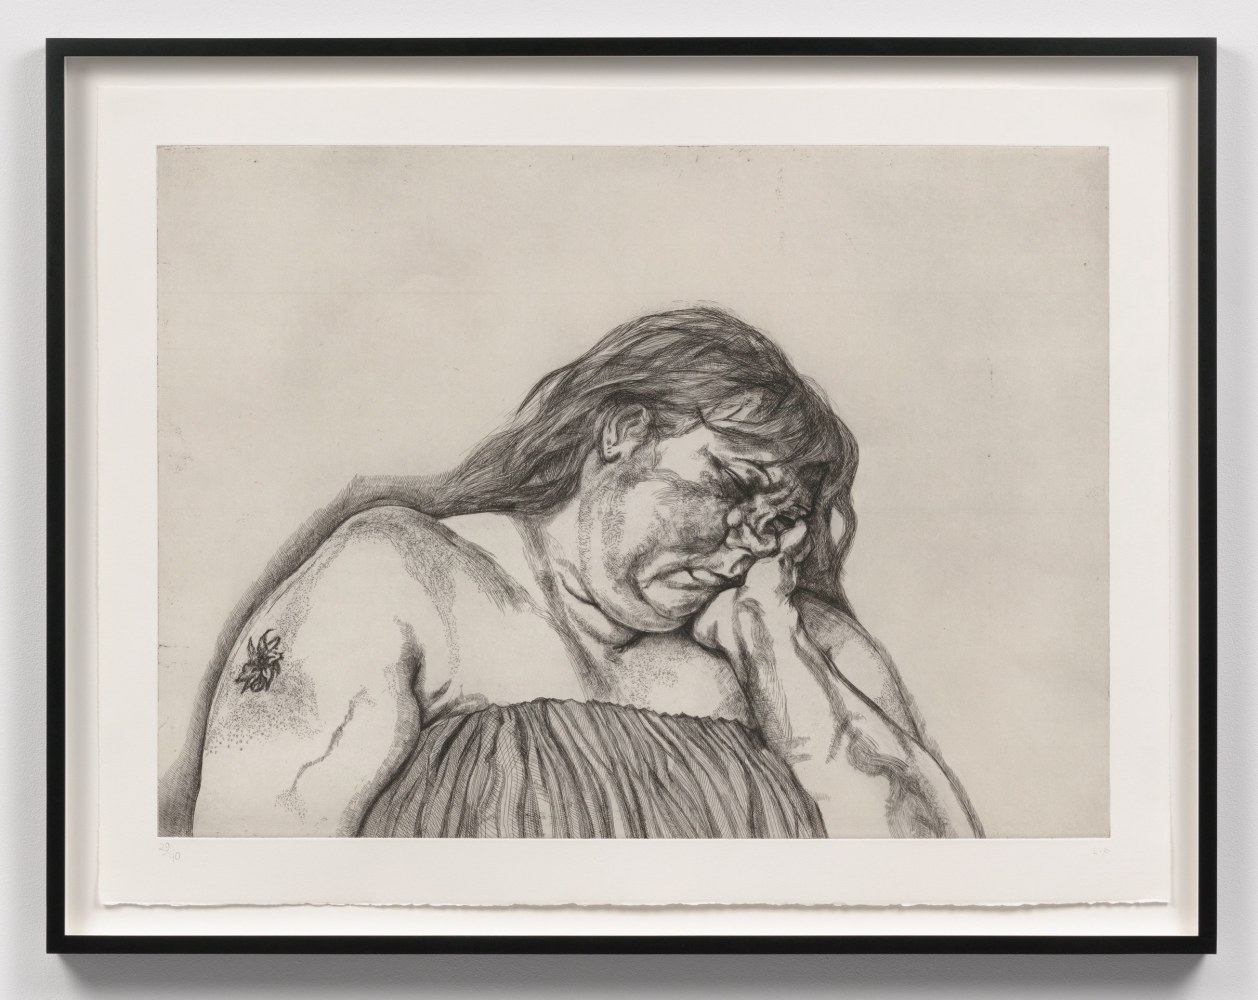 Lucian Freud

Woman with an Arm Tattoo, 1996

etching on Somerset Textured White paper, ed. of 40

27 3/4 x 35 1/4 in. / 70.5 x 89.5 cm